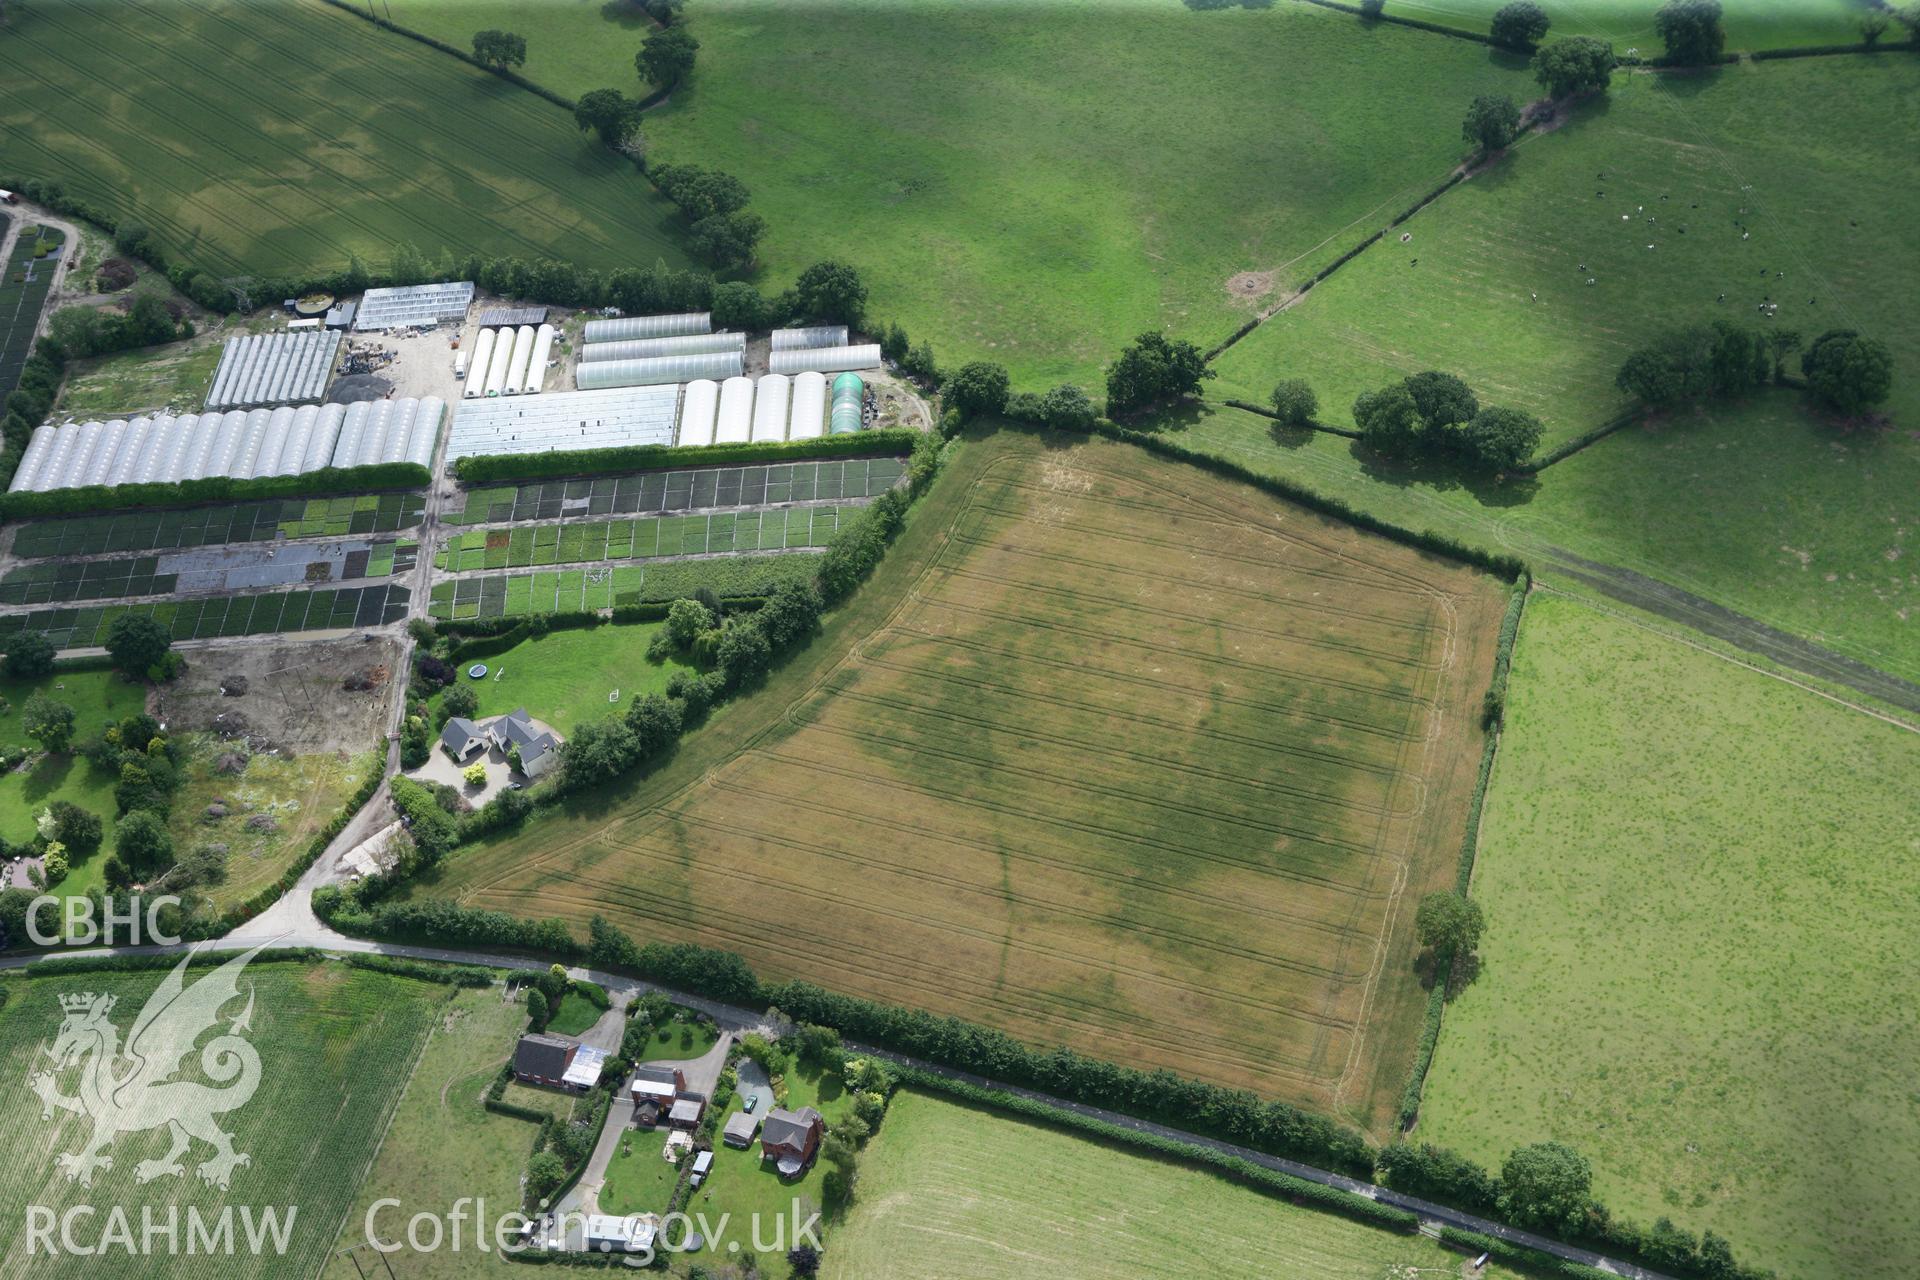 RCAHMW colour oblique photograph of Domgay Lane linear cropmarks. Taken by Toby Driver on 20/07/2011.